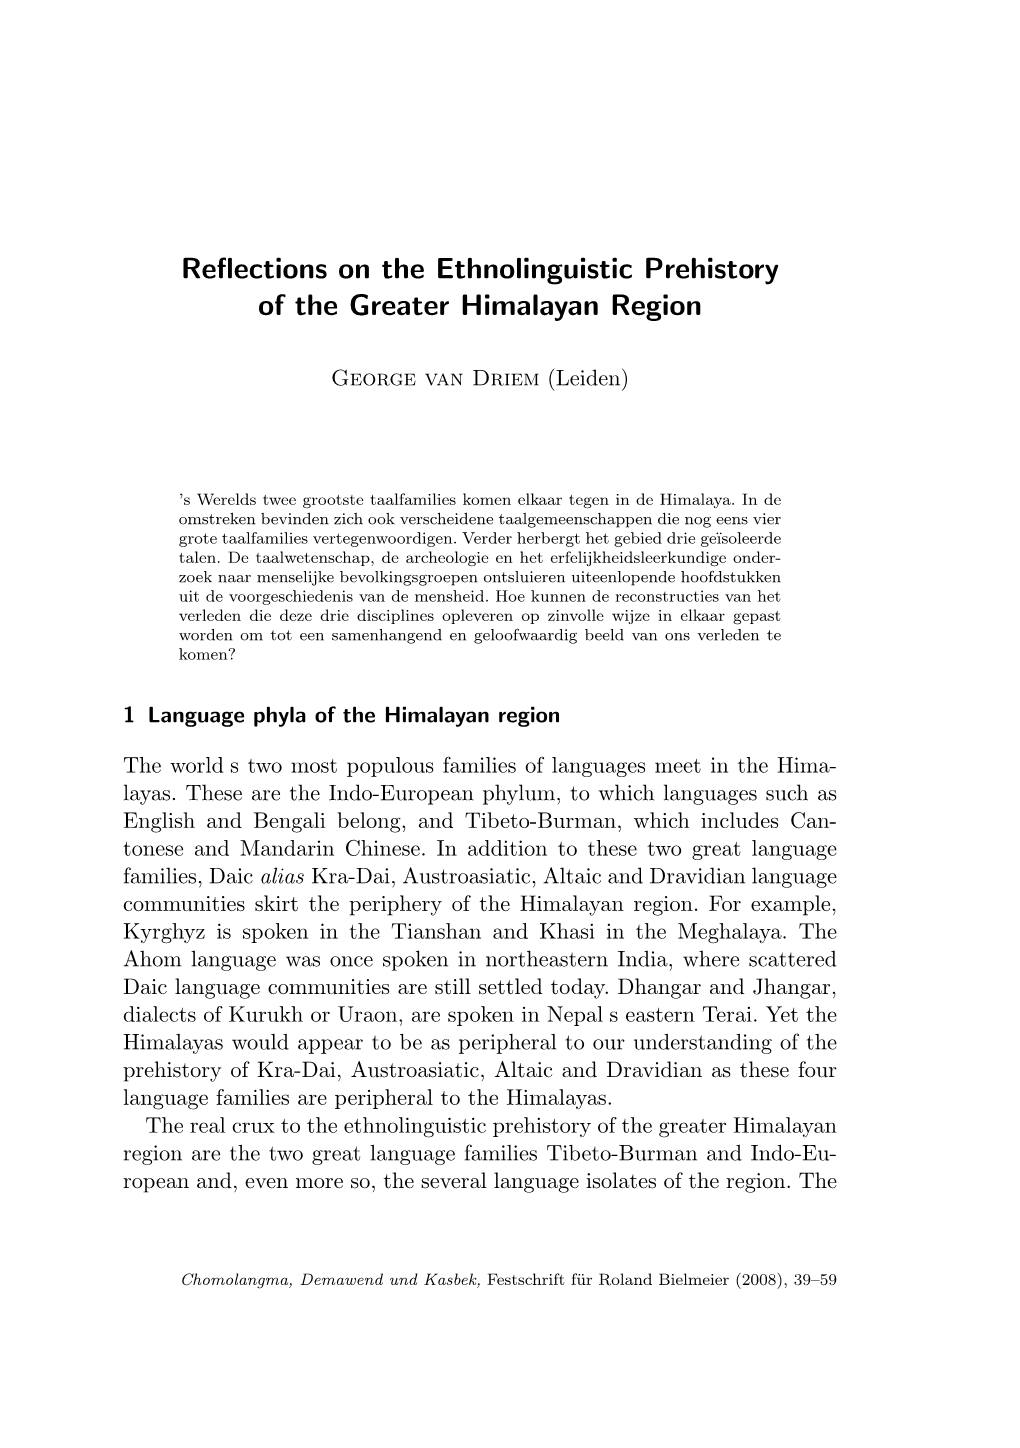 Reflections on the Ethnolinguistic